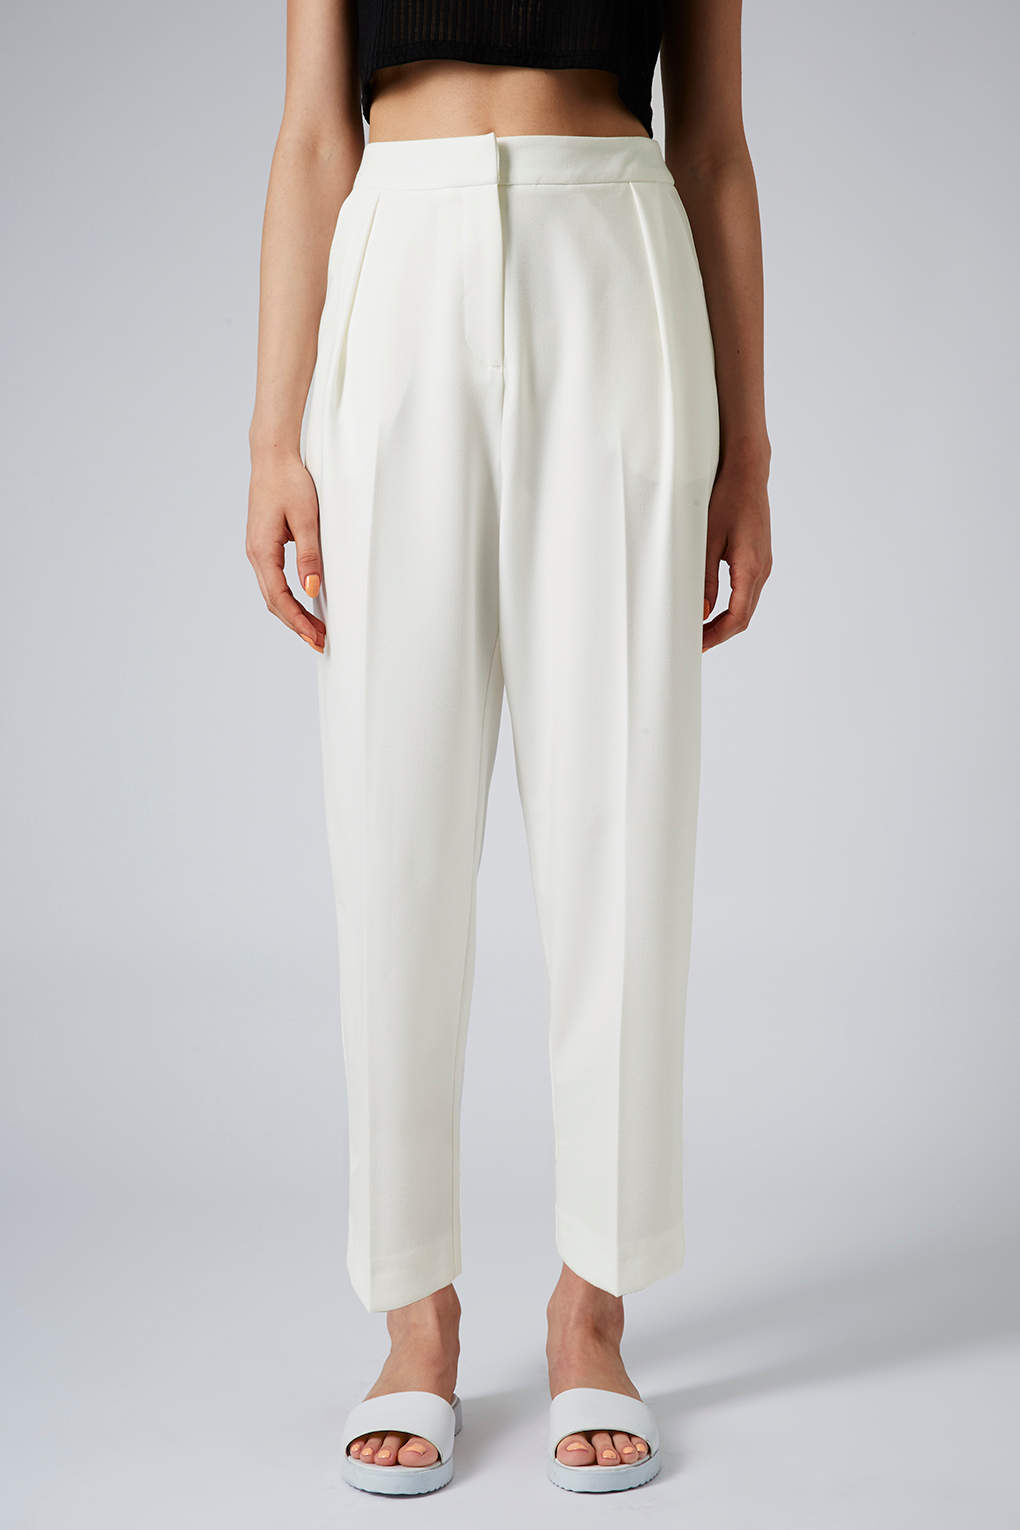 Topshop Cropped Peg Leg Trousers in White (IVORY) | Lyst